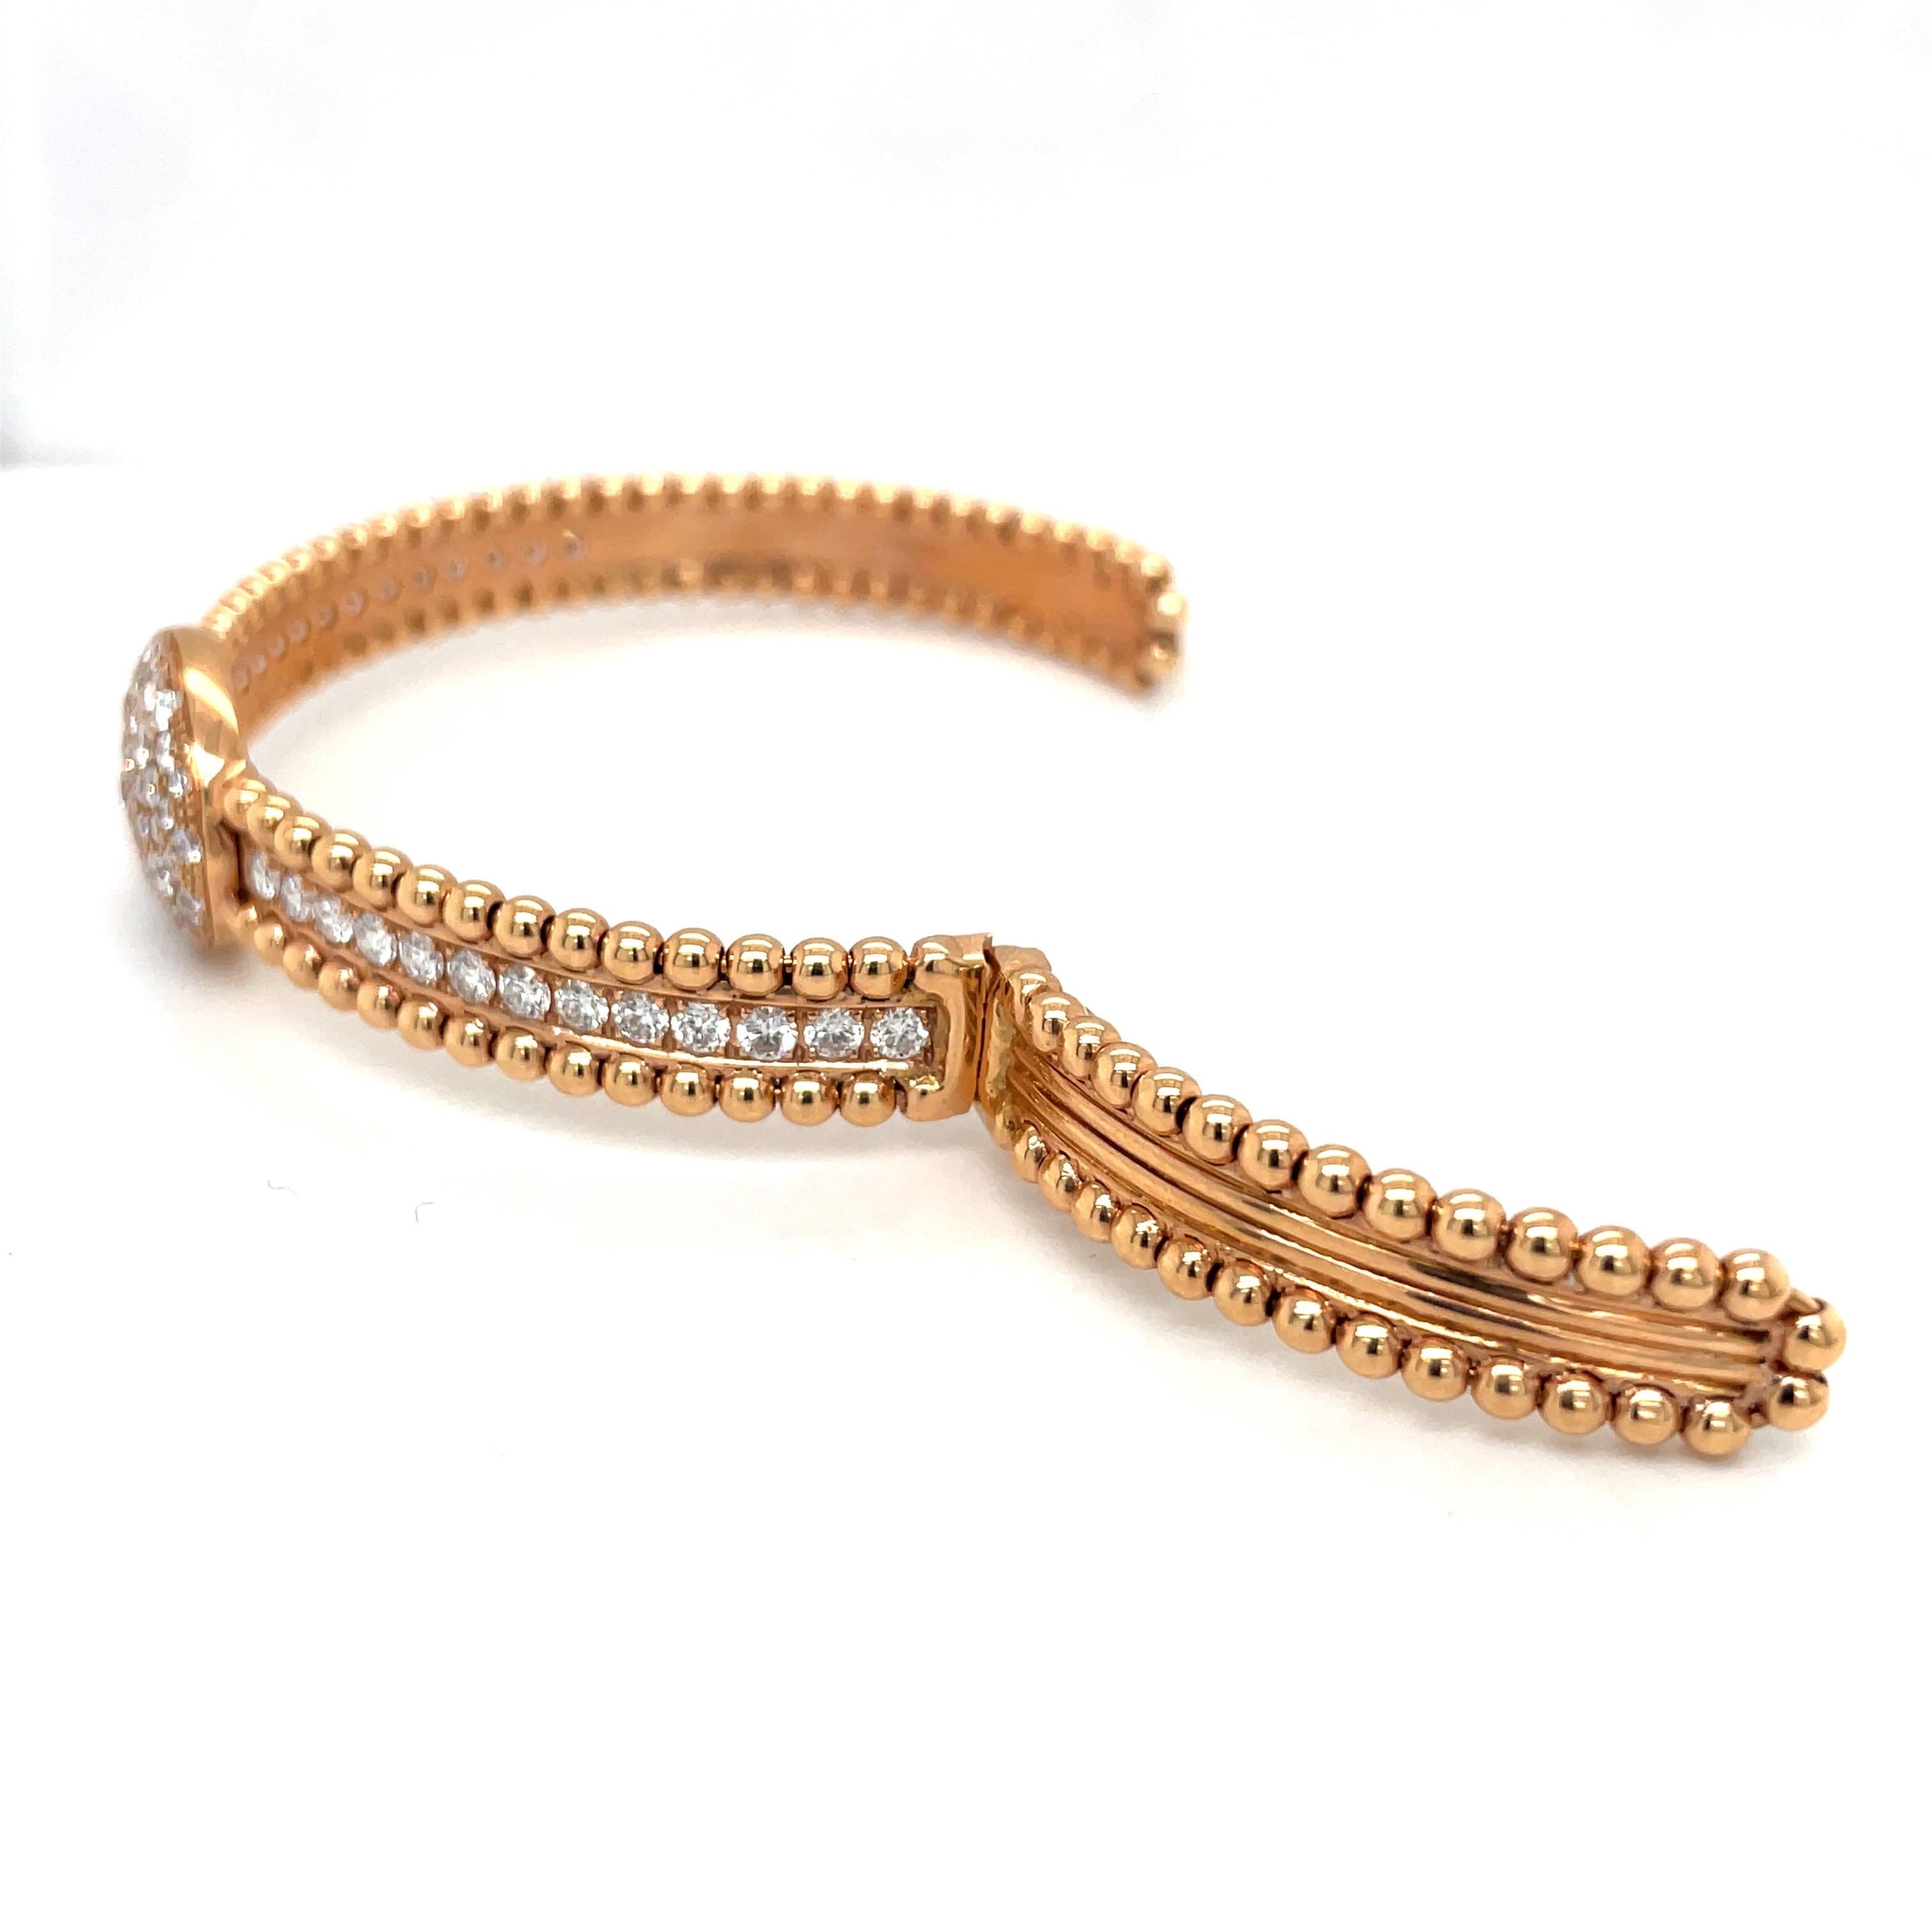 A very classic and easy to wear 18 karat rose gold bracelet. The bracelet is designed with a center row of round brilliant diamonds. An oval pave diamond button is set on the center. The bracelet is finished with a beaded edge. It has a hinge on one